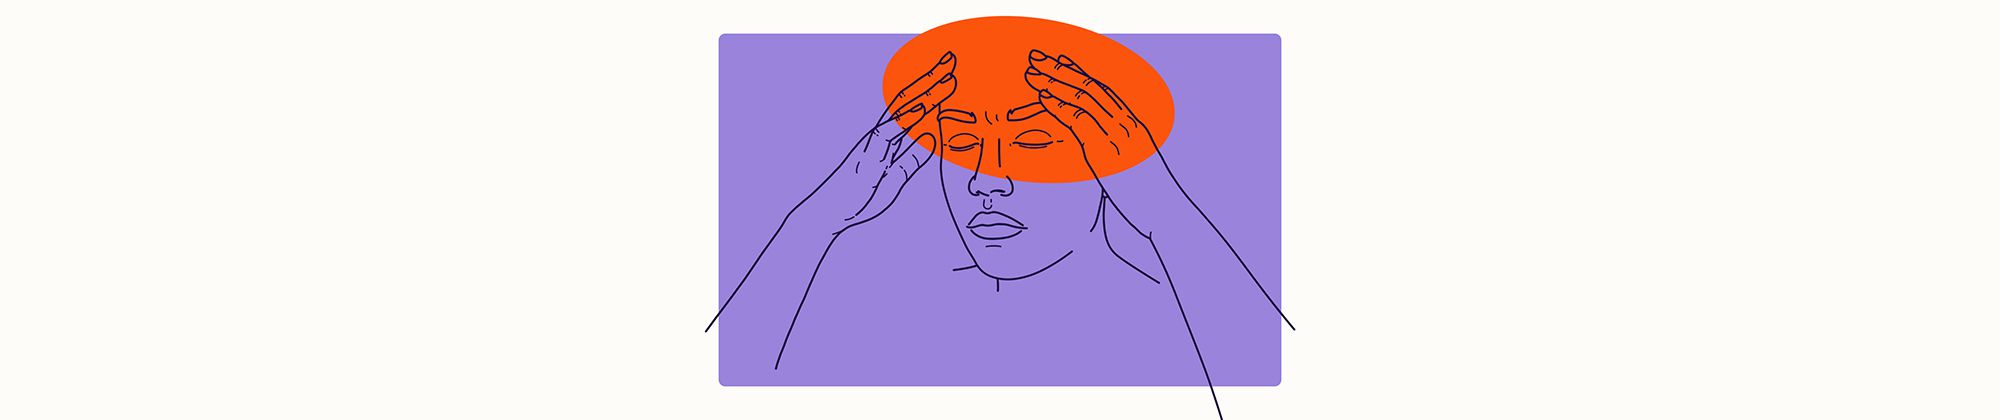 Illustration of a person with a migraine